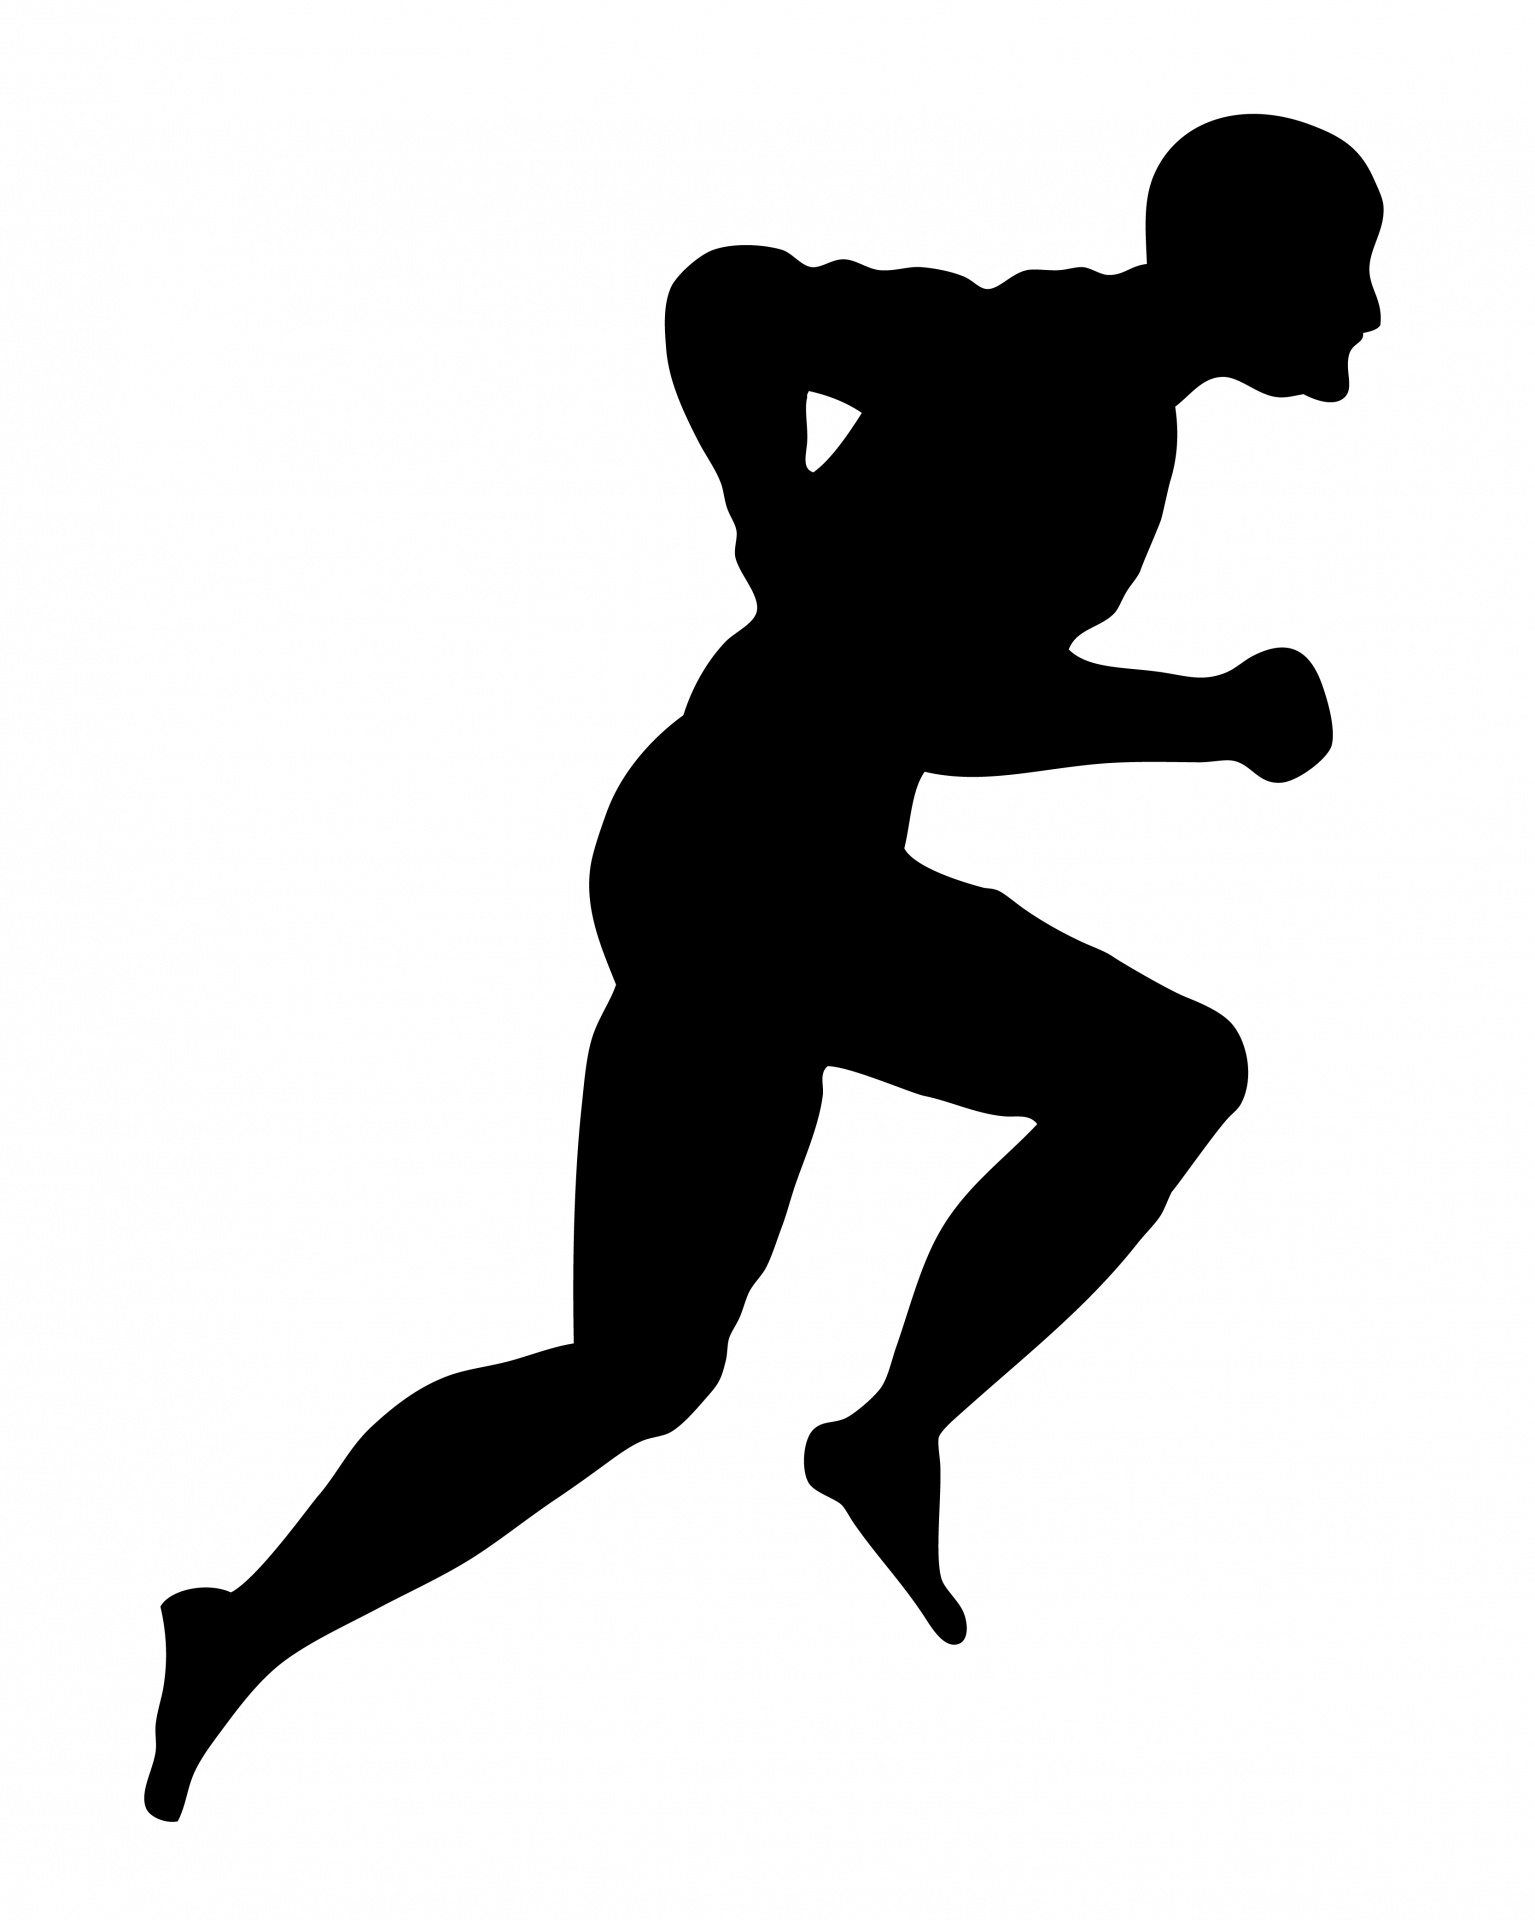 Person running running man silhouette clipart free